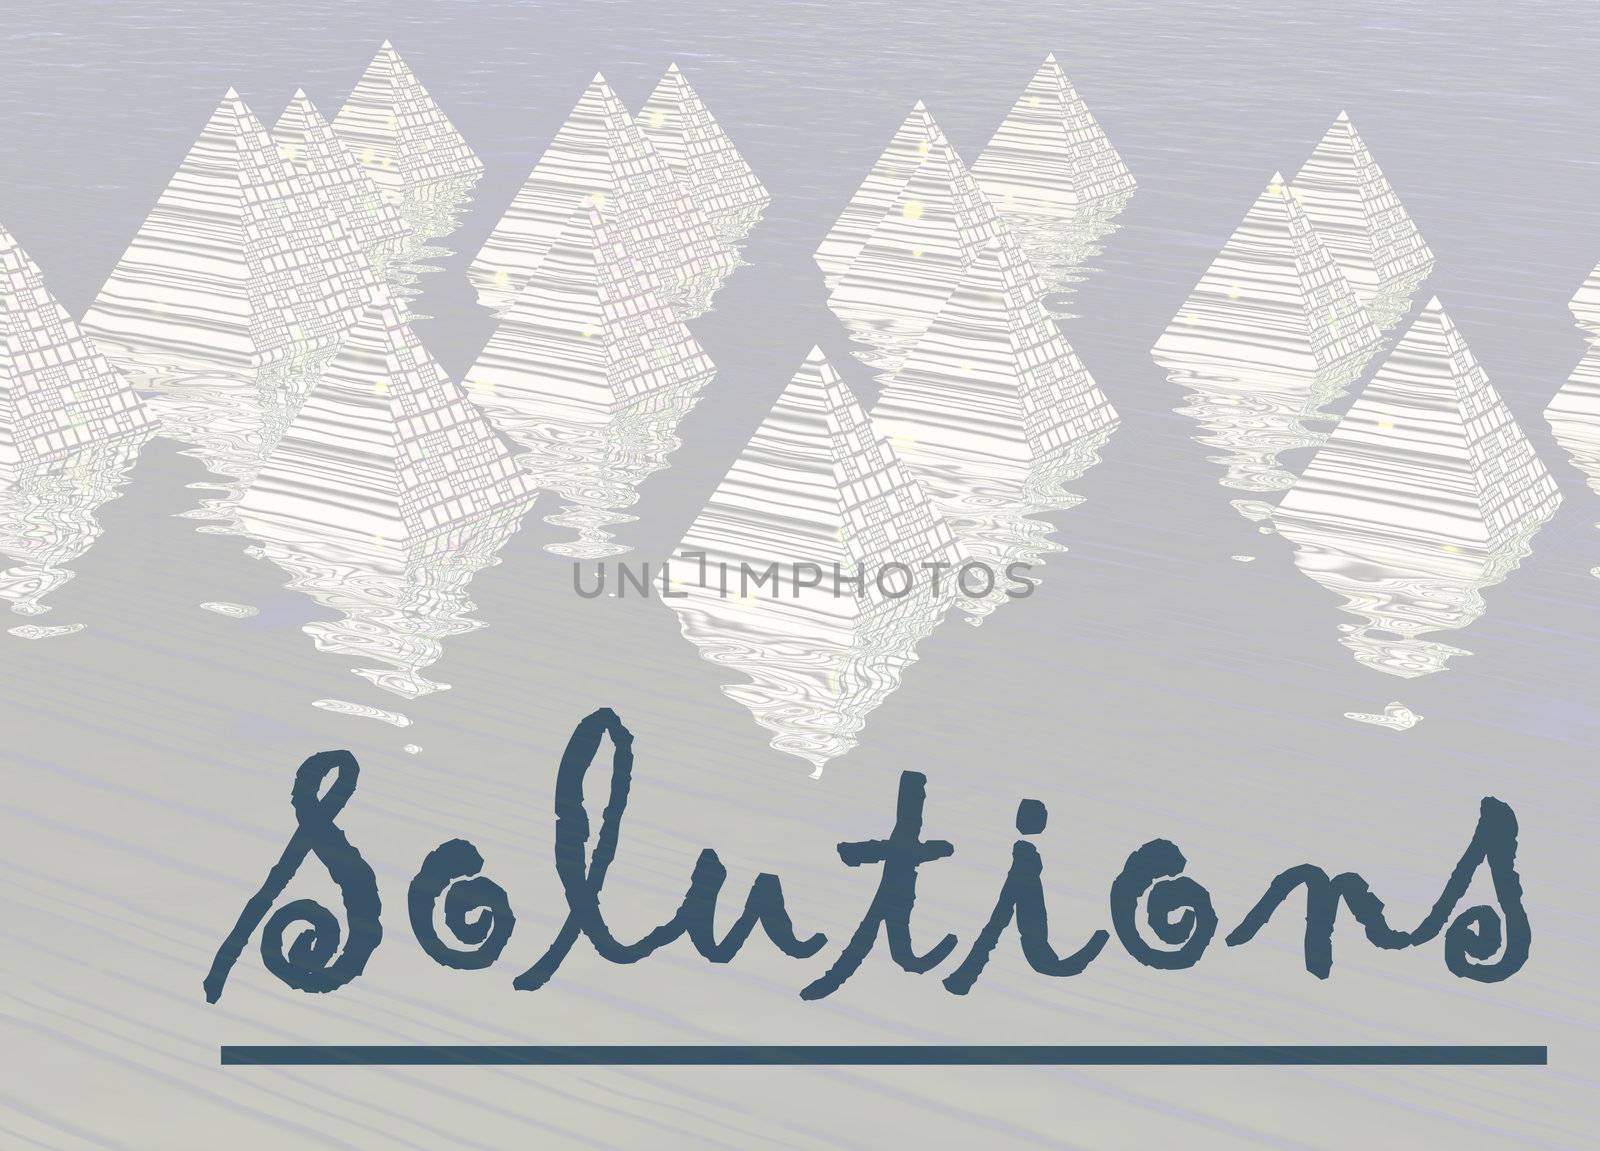 Digital Pyramids in Rendered Water with Solutions Text for Techn by bobbigmac